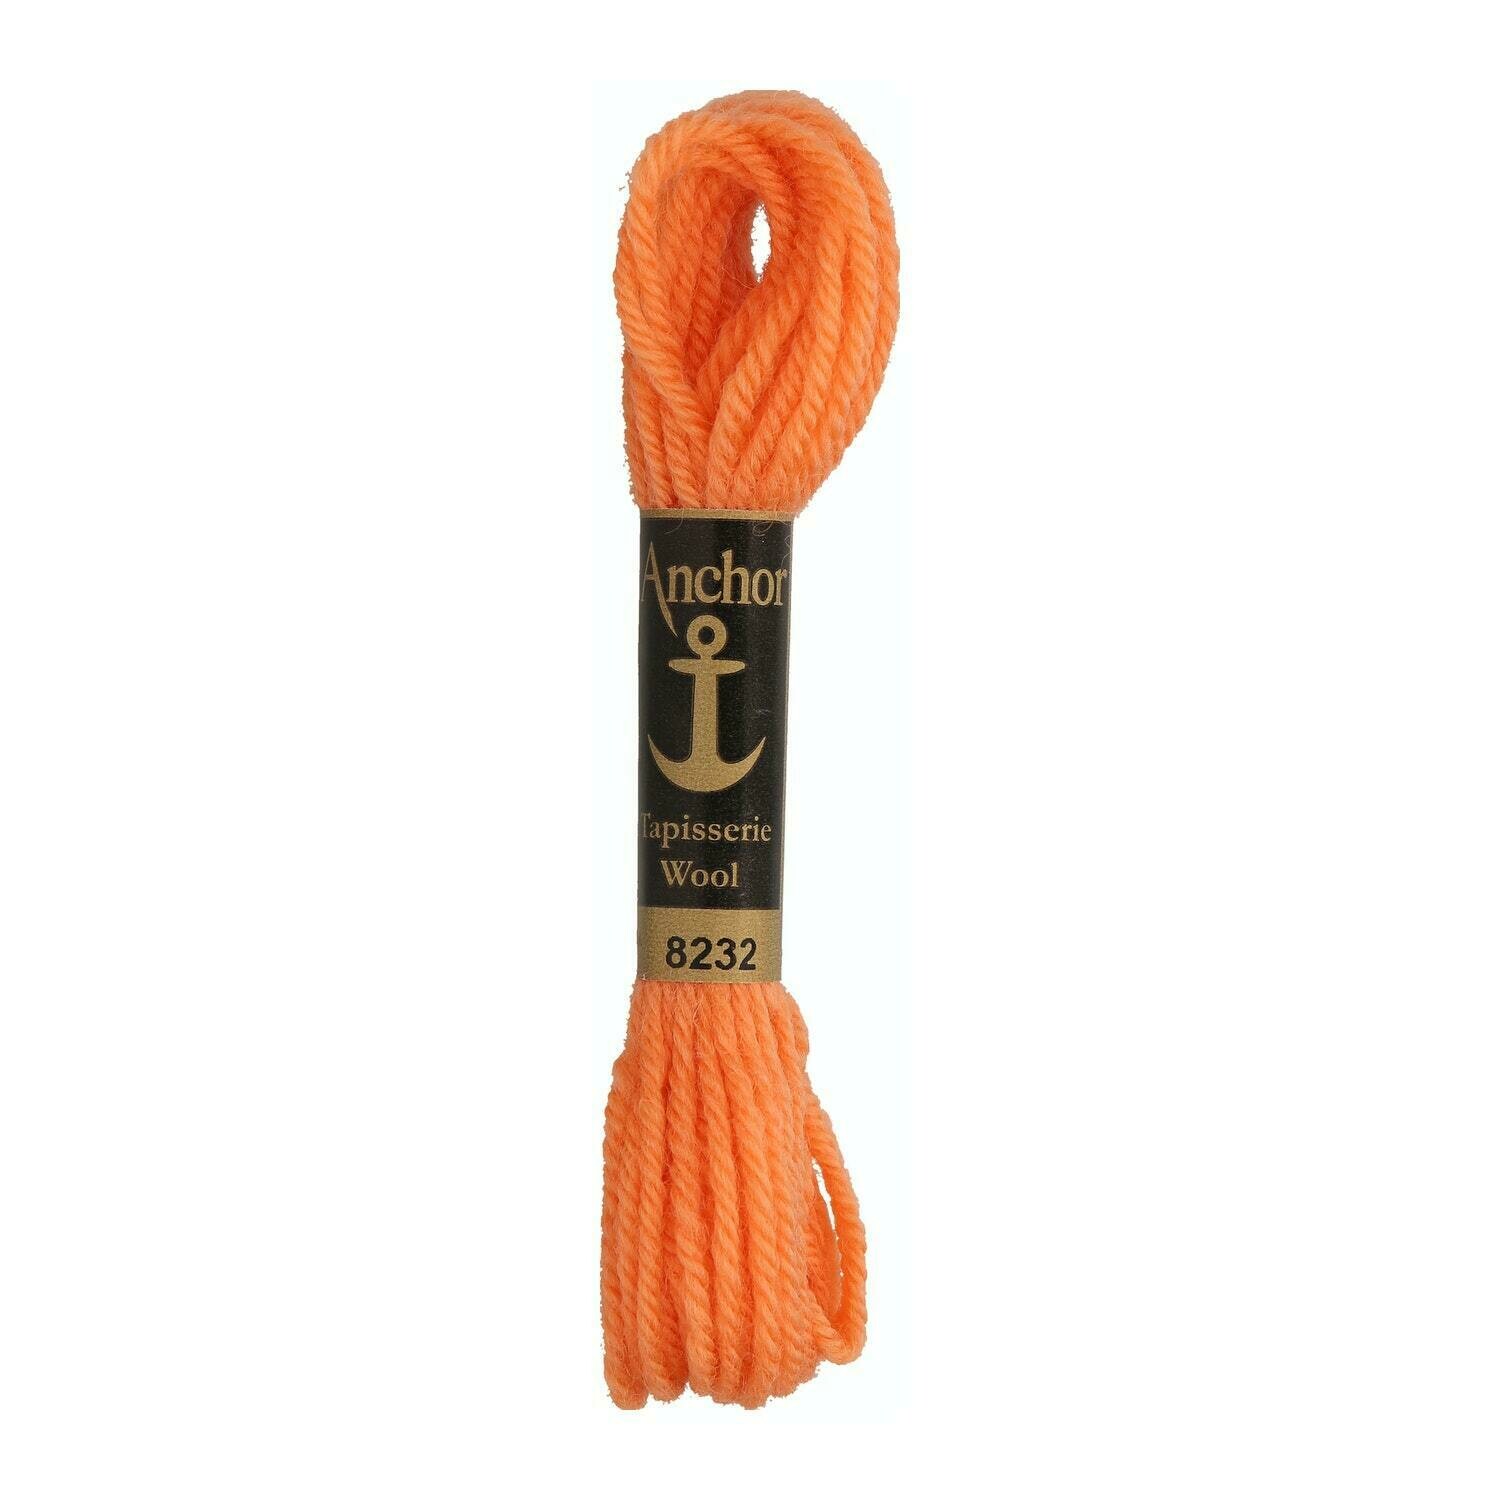 Anchor Tapisserie Wool #08232